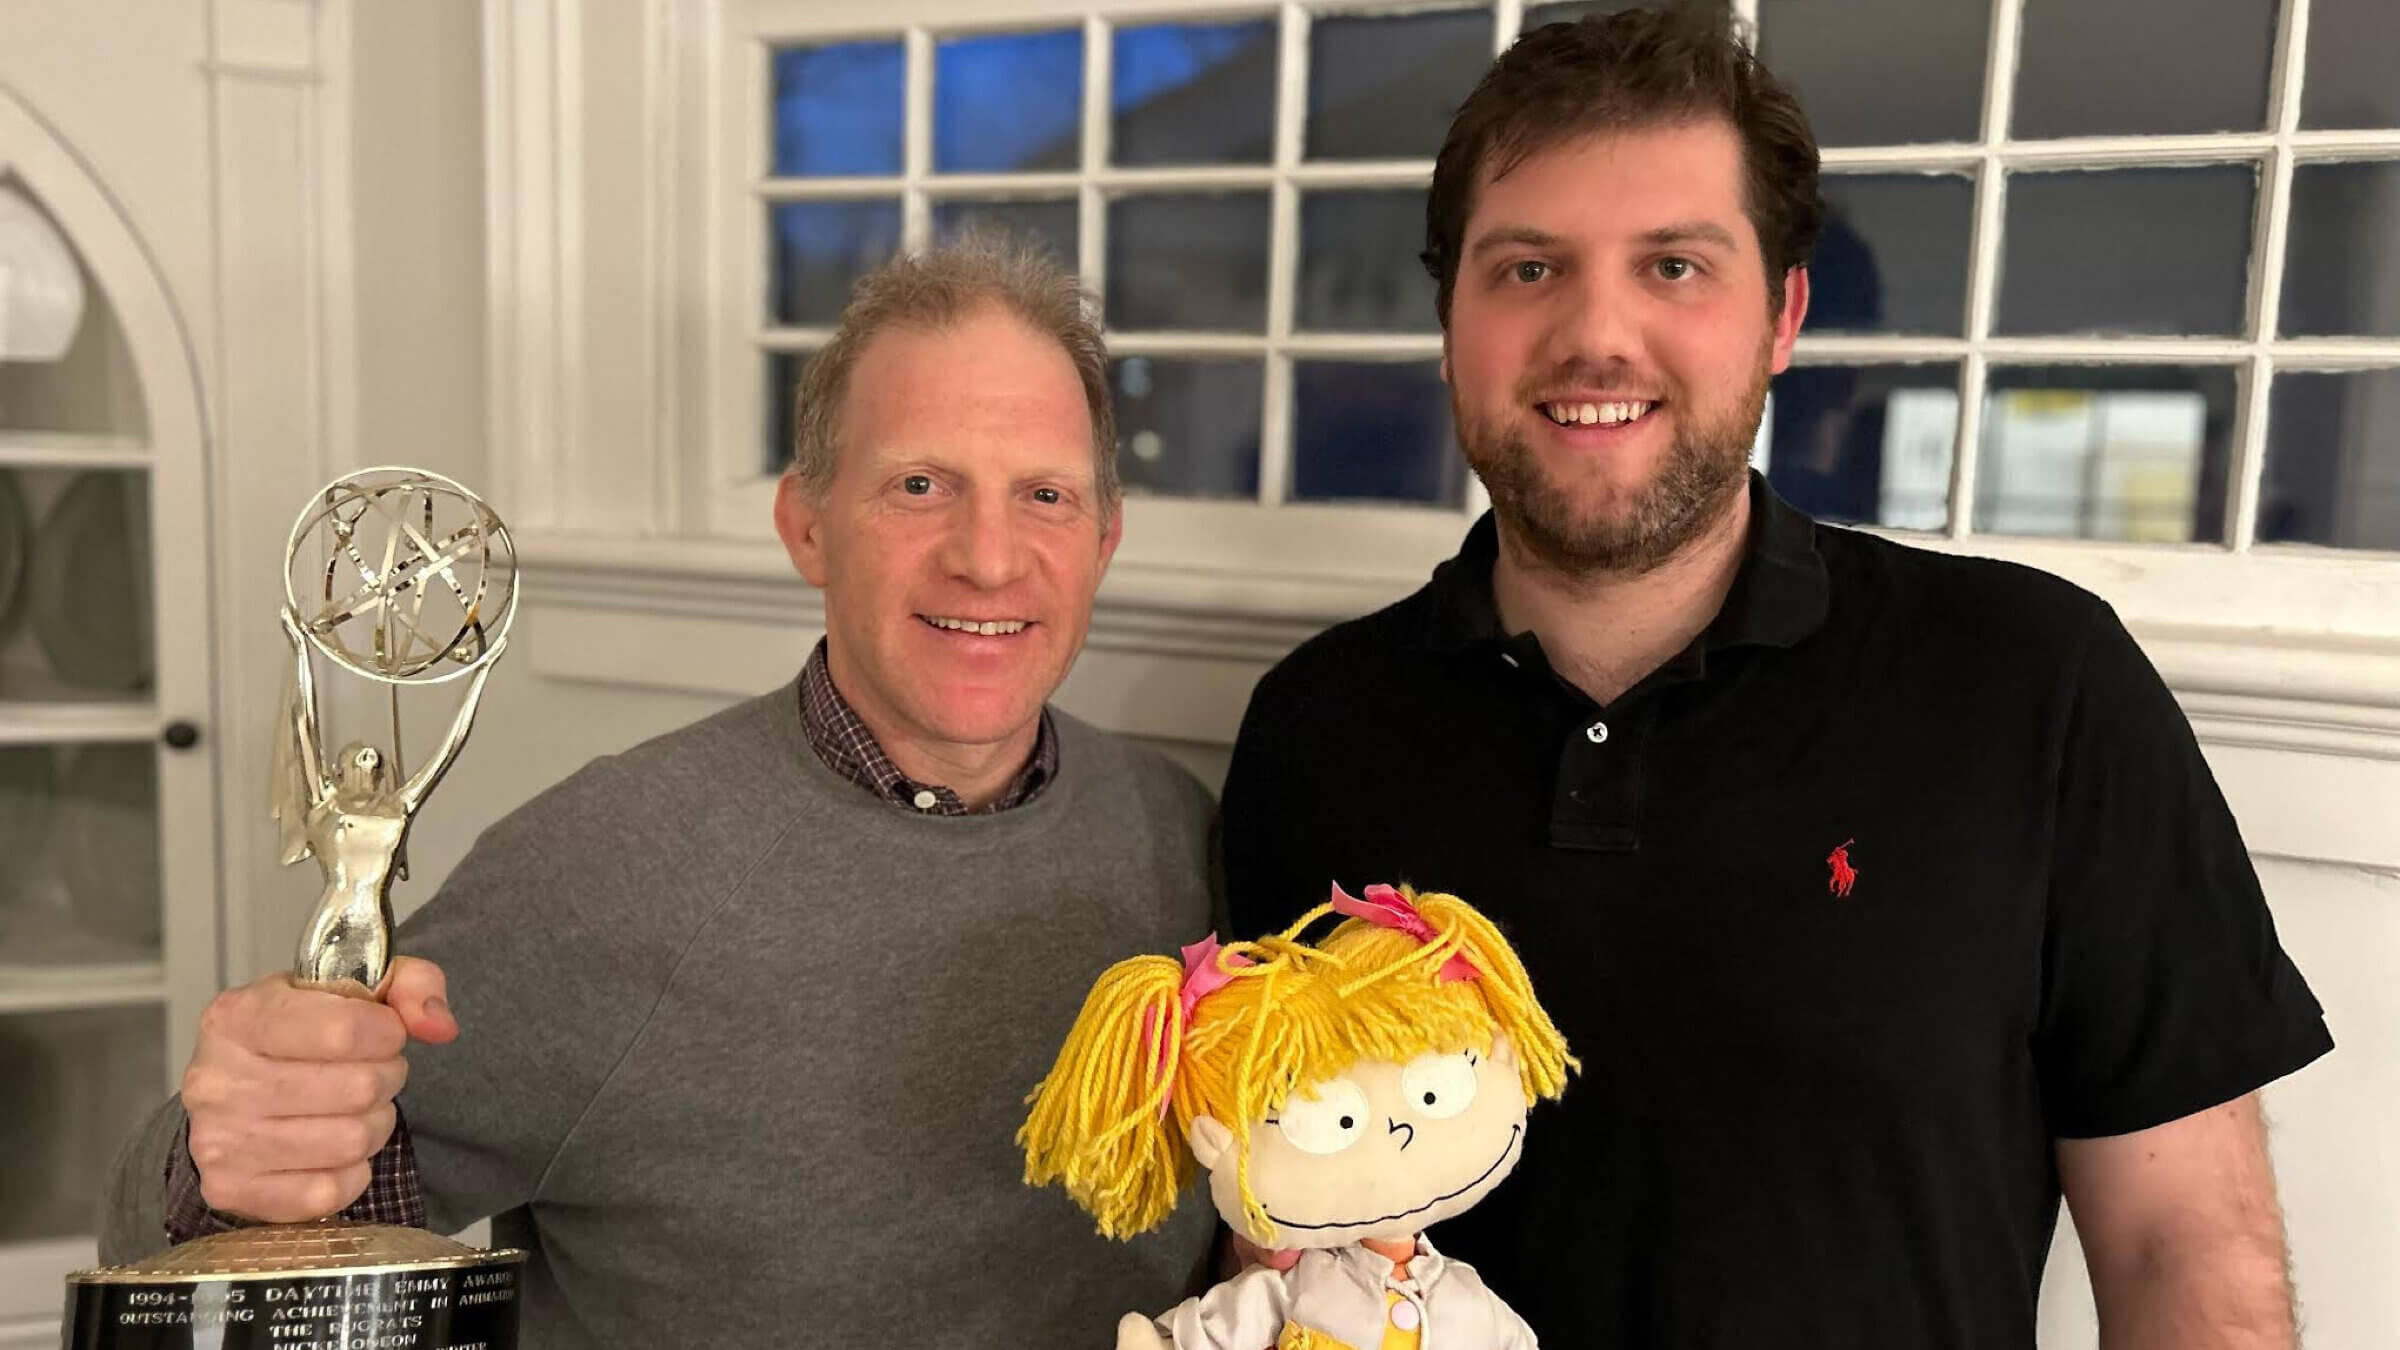 Jonathan Greenberg, left, with the Daytime Emmy Award for the  the Rugrats Passover episode, which he co-wrote, and his son Hank Greenberg. They stand before a stuffed version of Angelica, a Rugrats character.